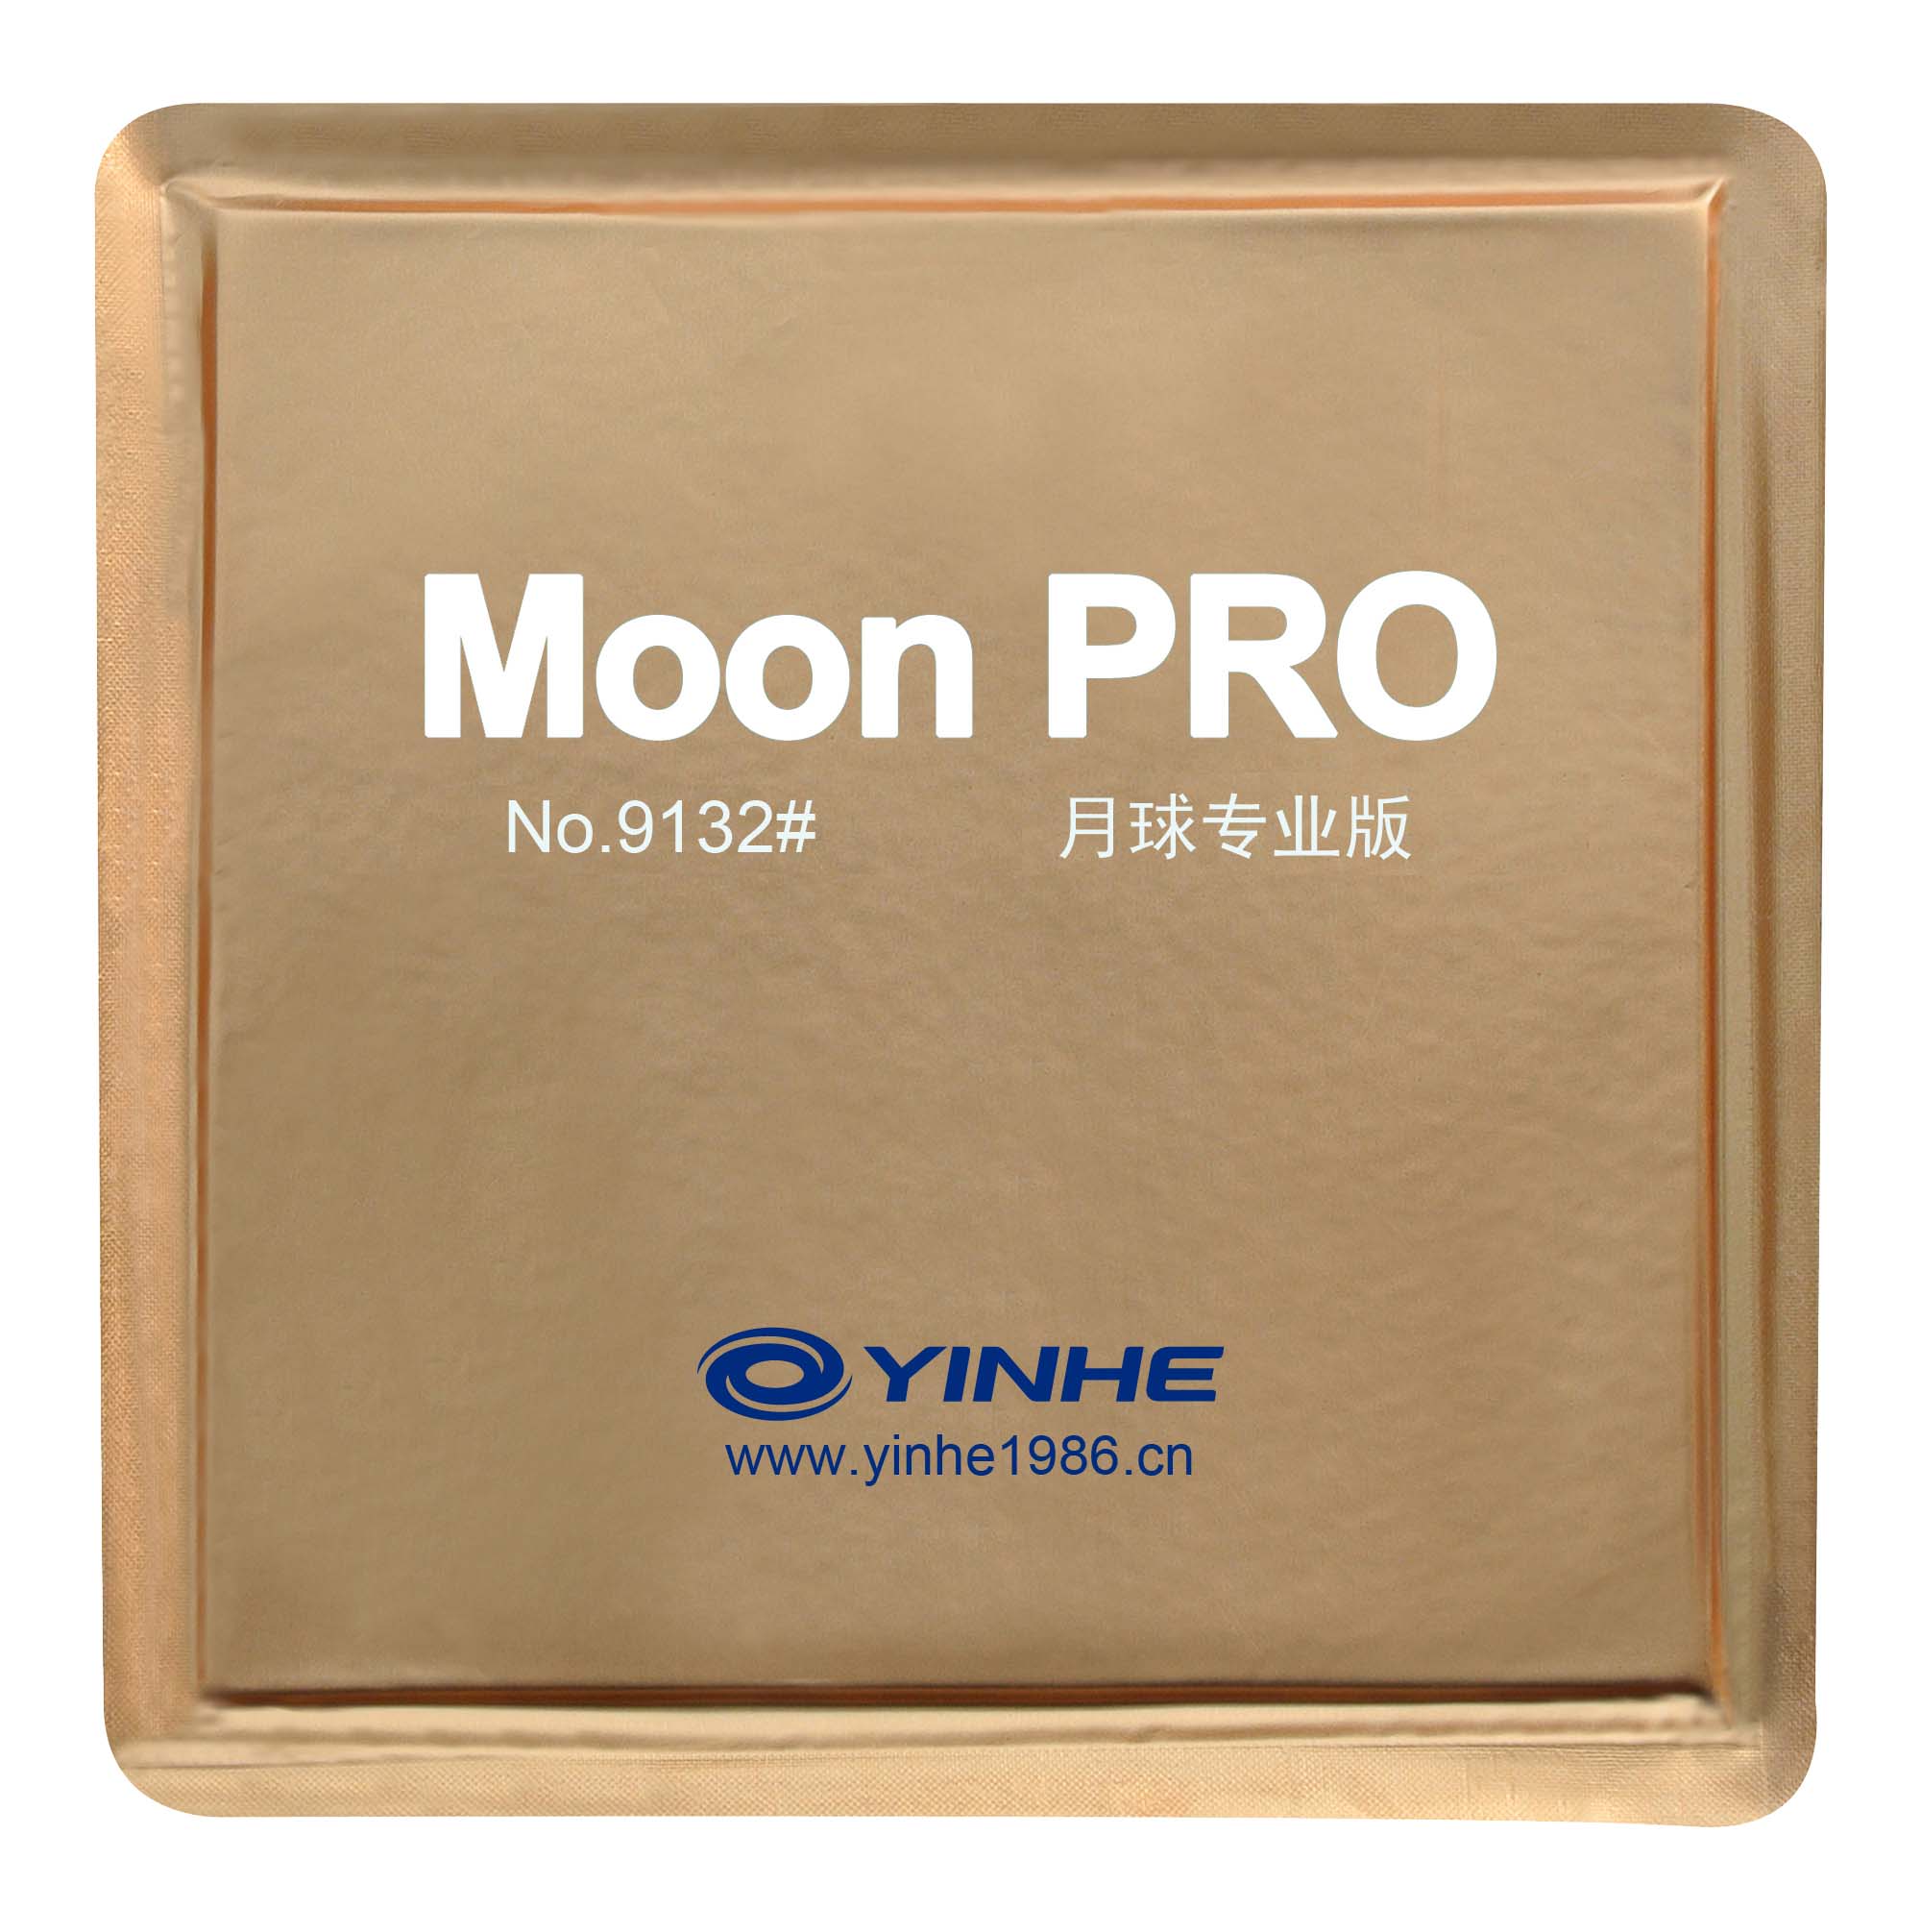 download the new for windows Lunar Pro